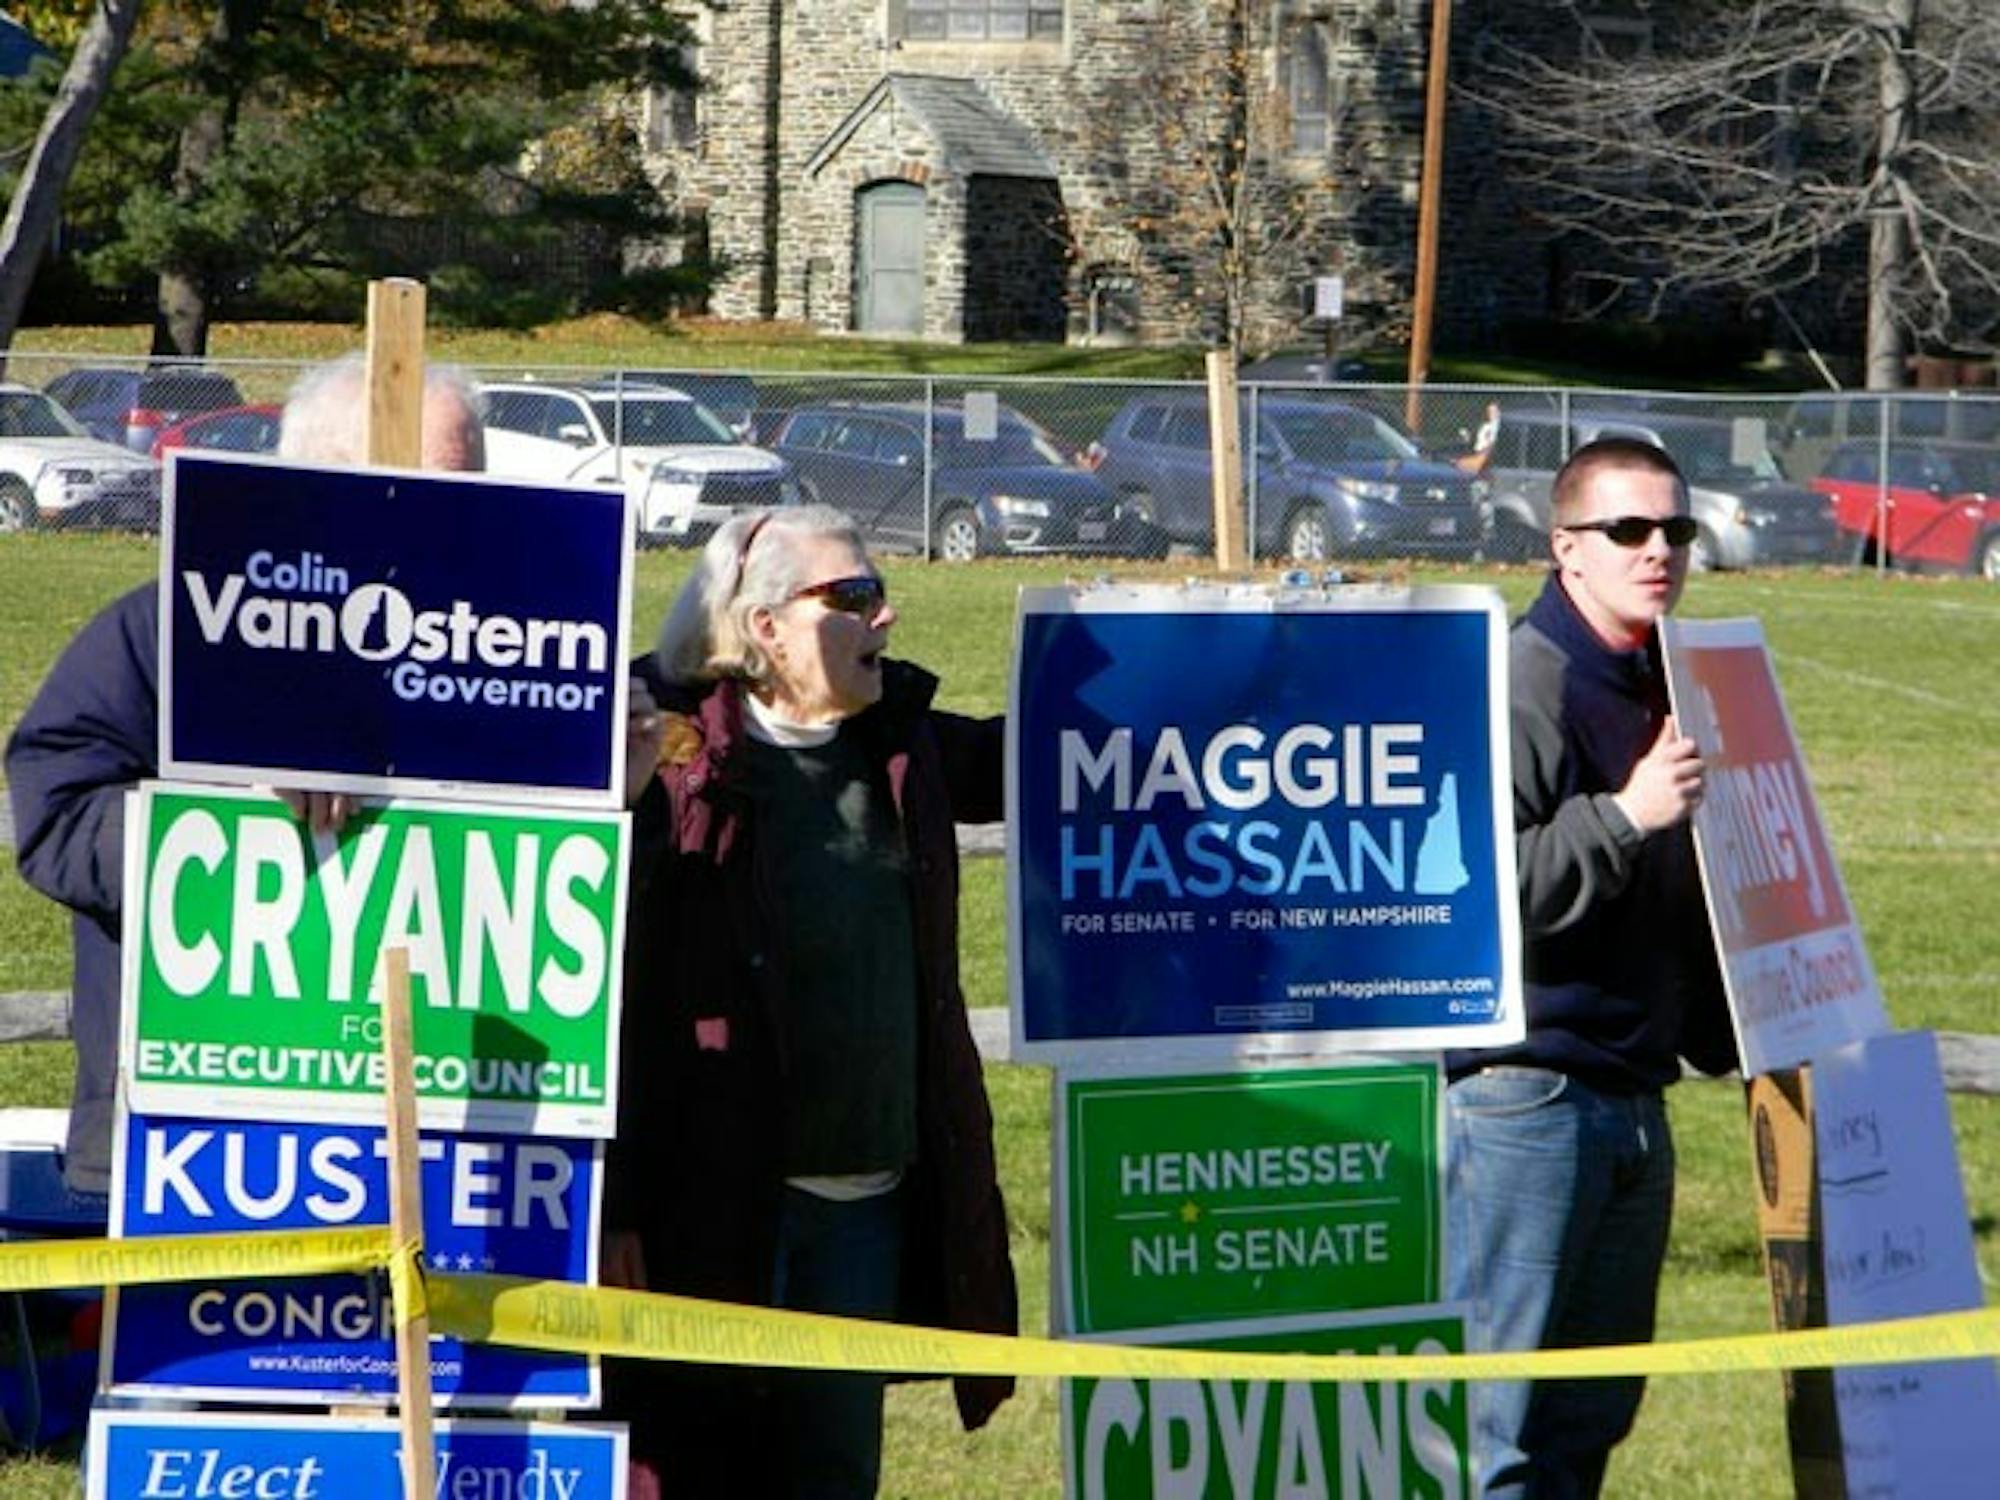 Dartmouth students and Hanover community members canvass for the 2016 New Hampshire Senate elec on.